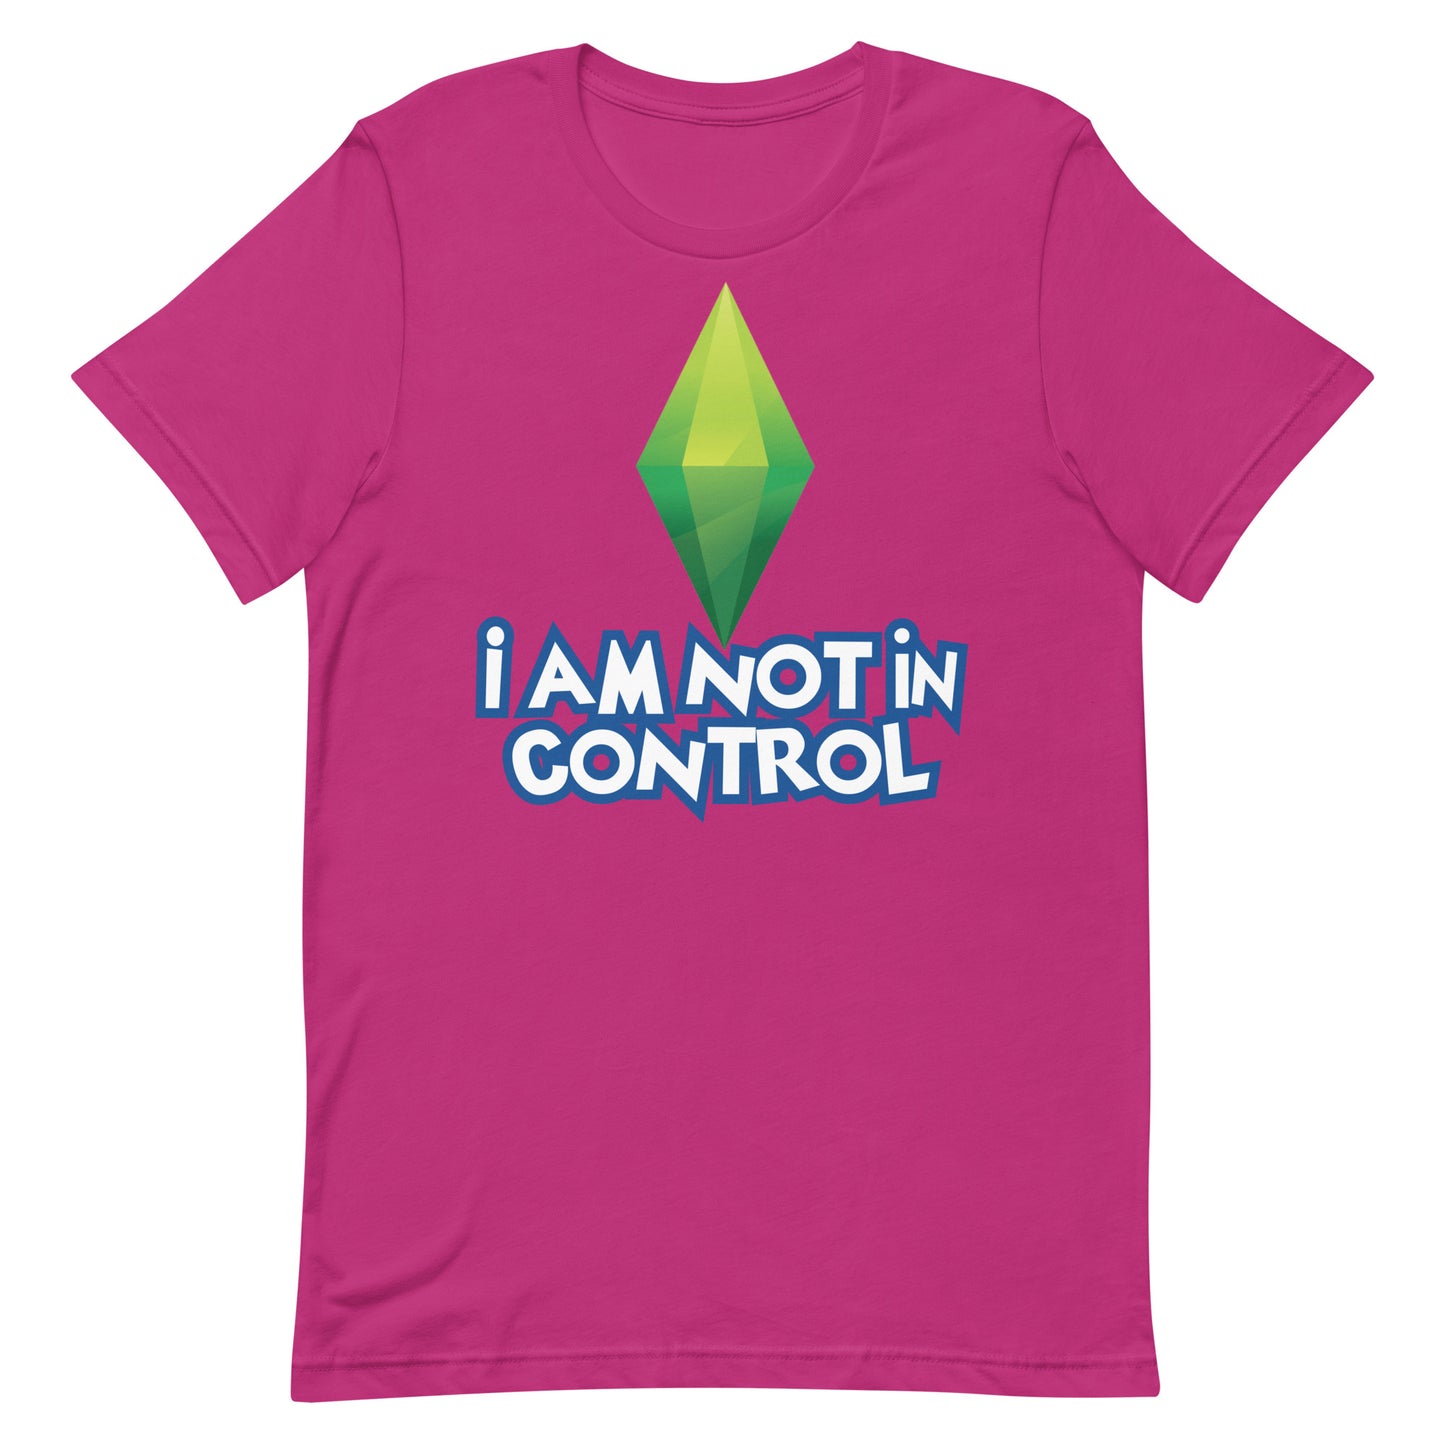 I Am Not in Control Unisex t-shirt